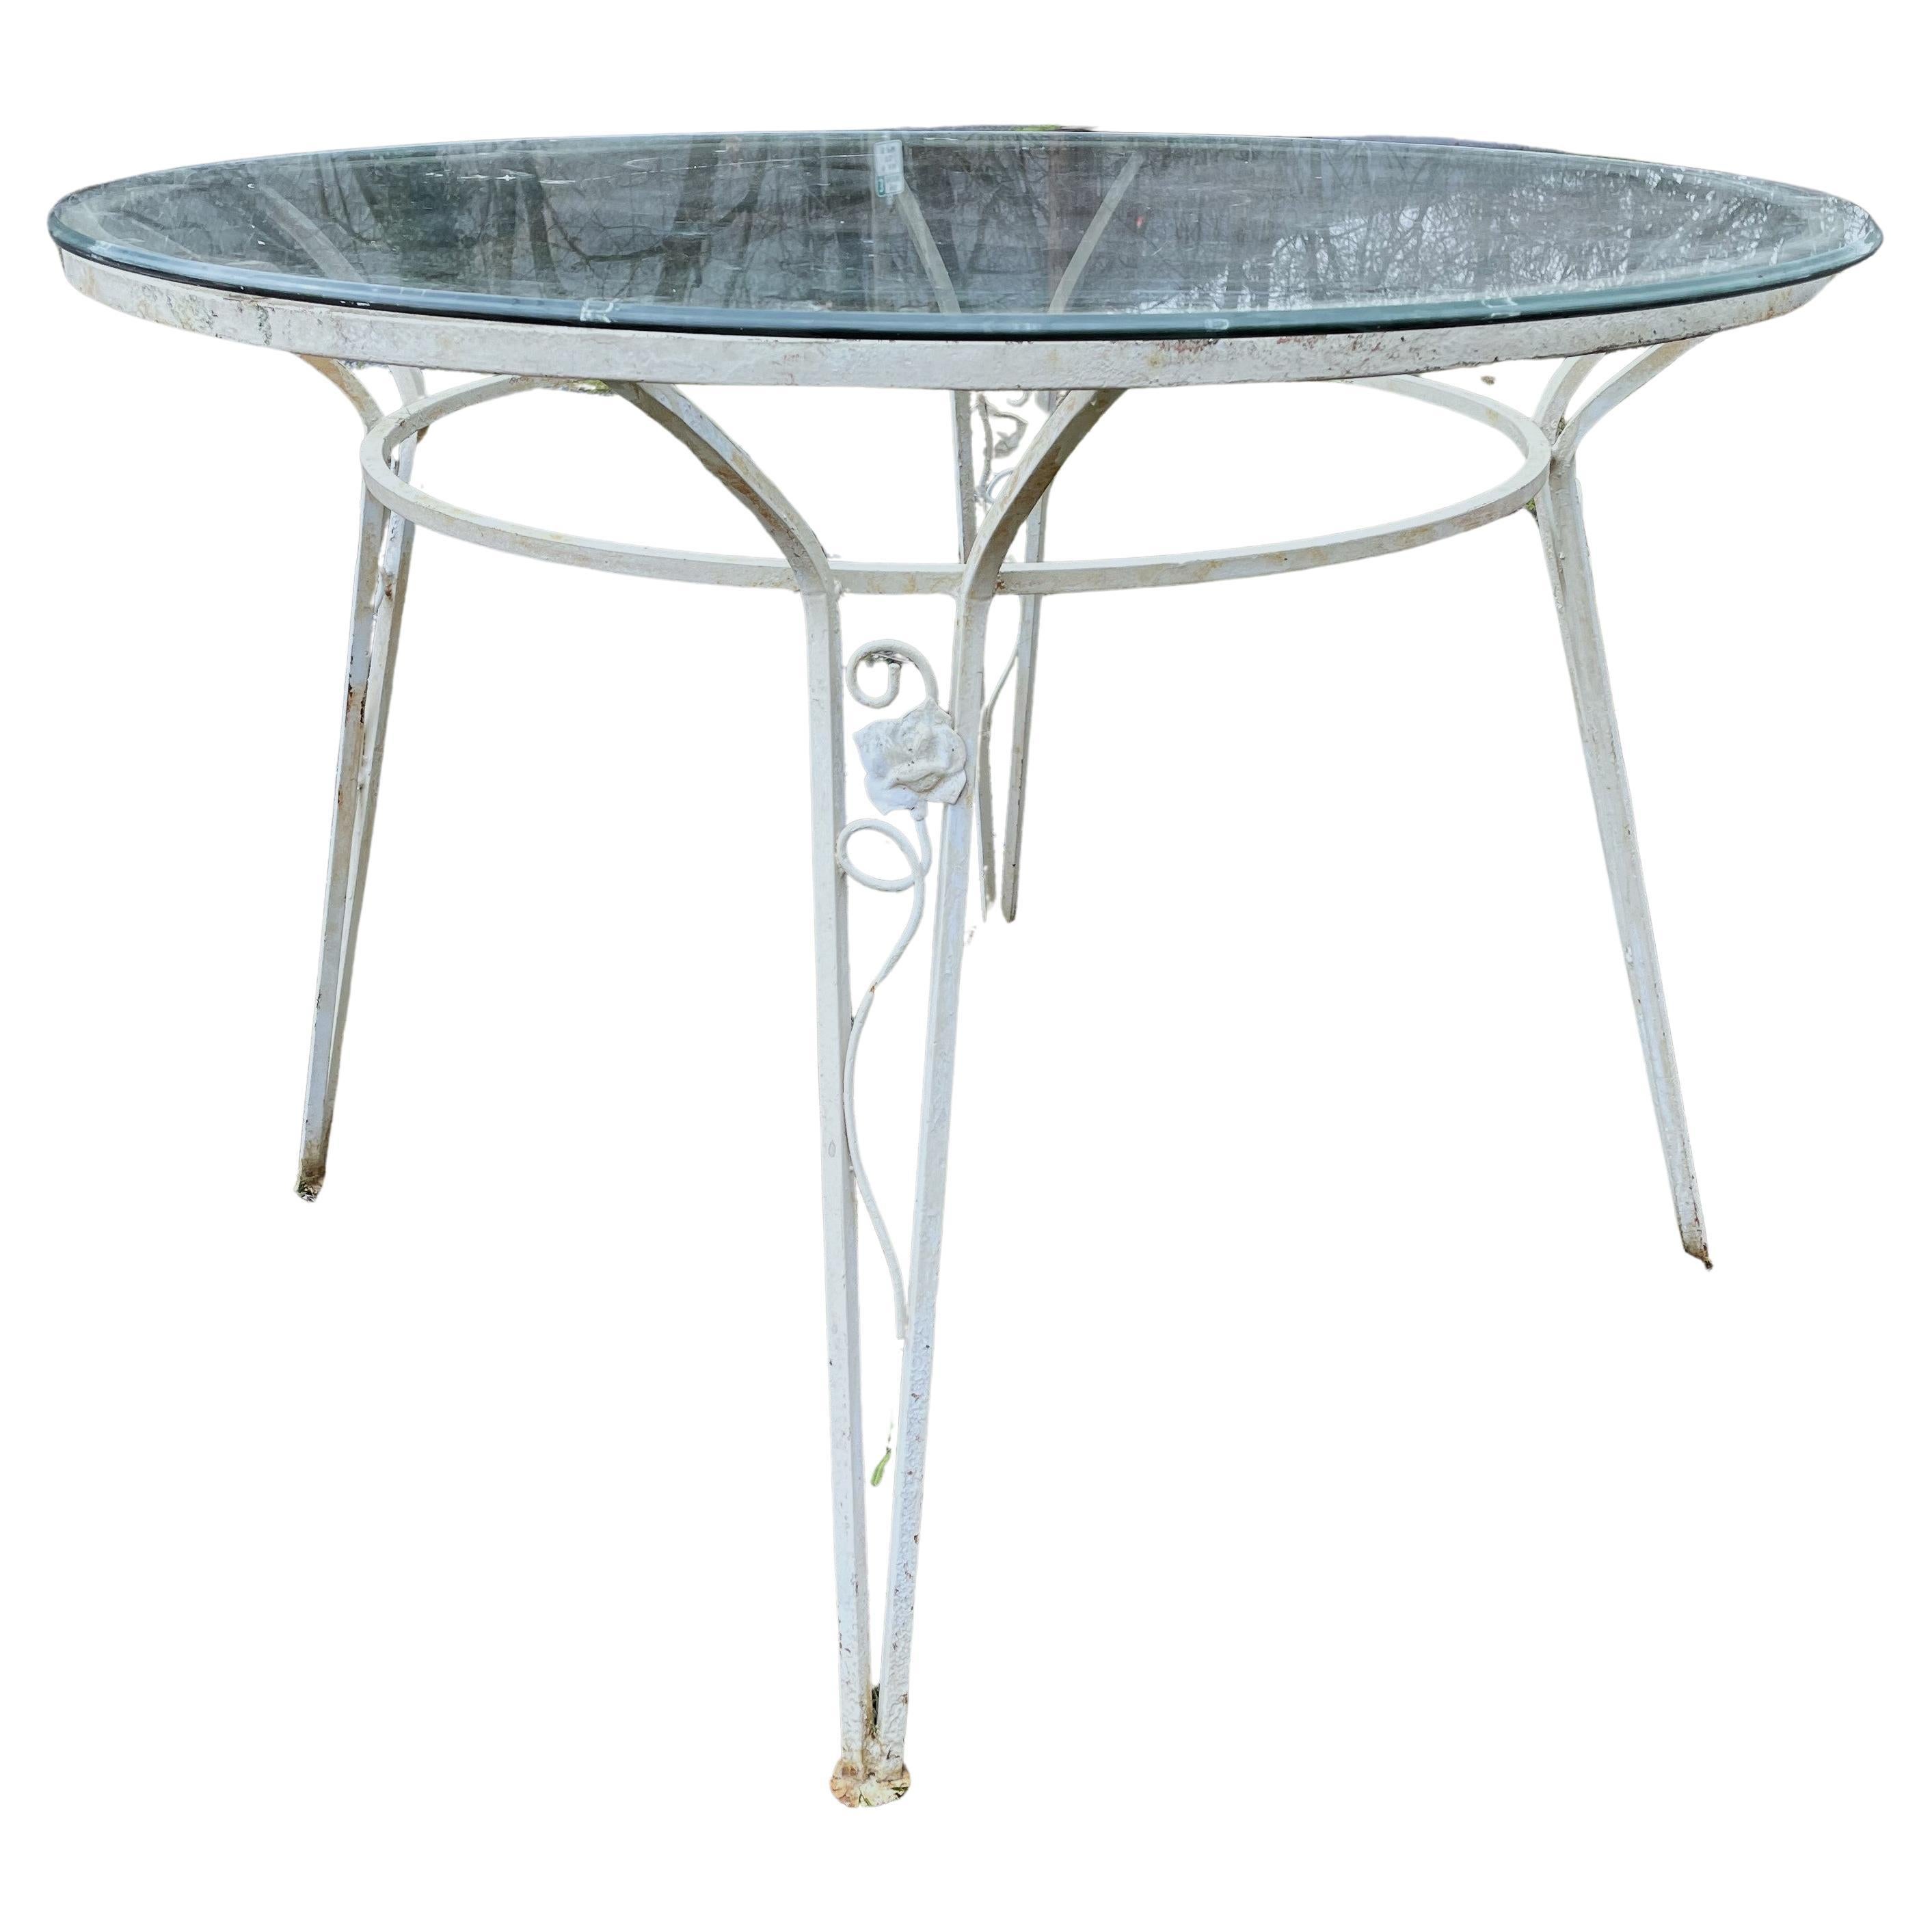 Rose & Vine Pattern Wrought Iron Round Glass Top Dining Table Salterini Style 